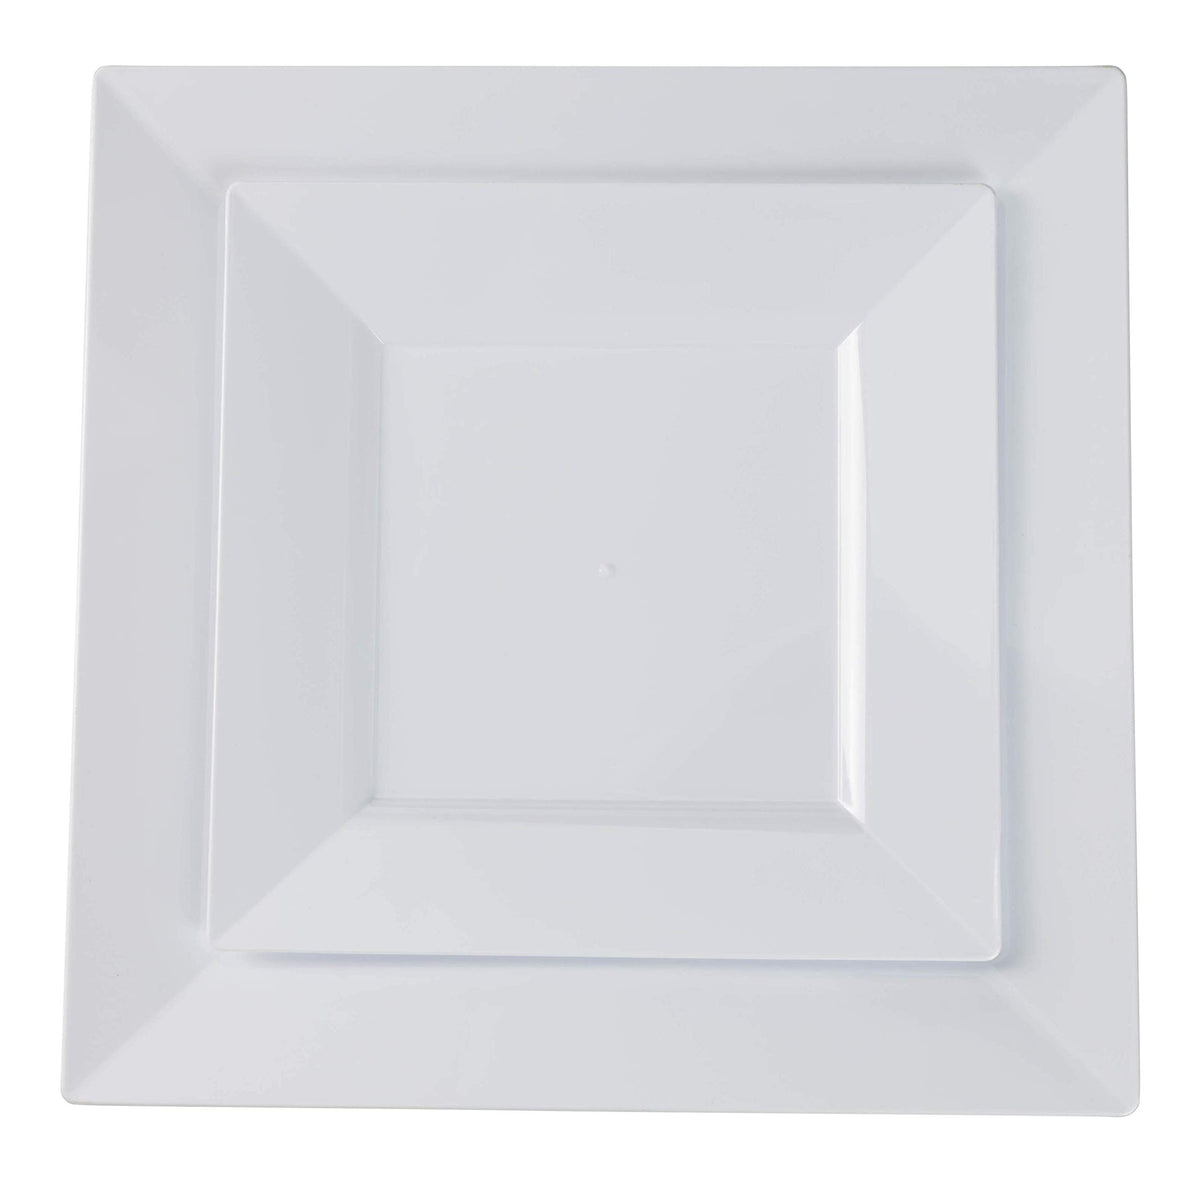 10.75 In. White Square Plates | 10 Count